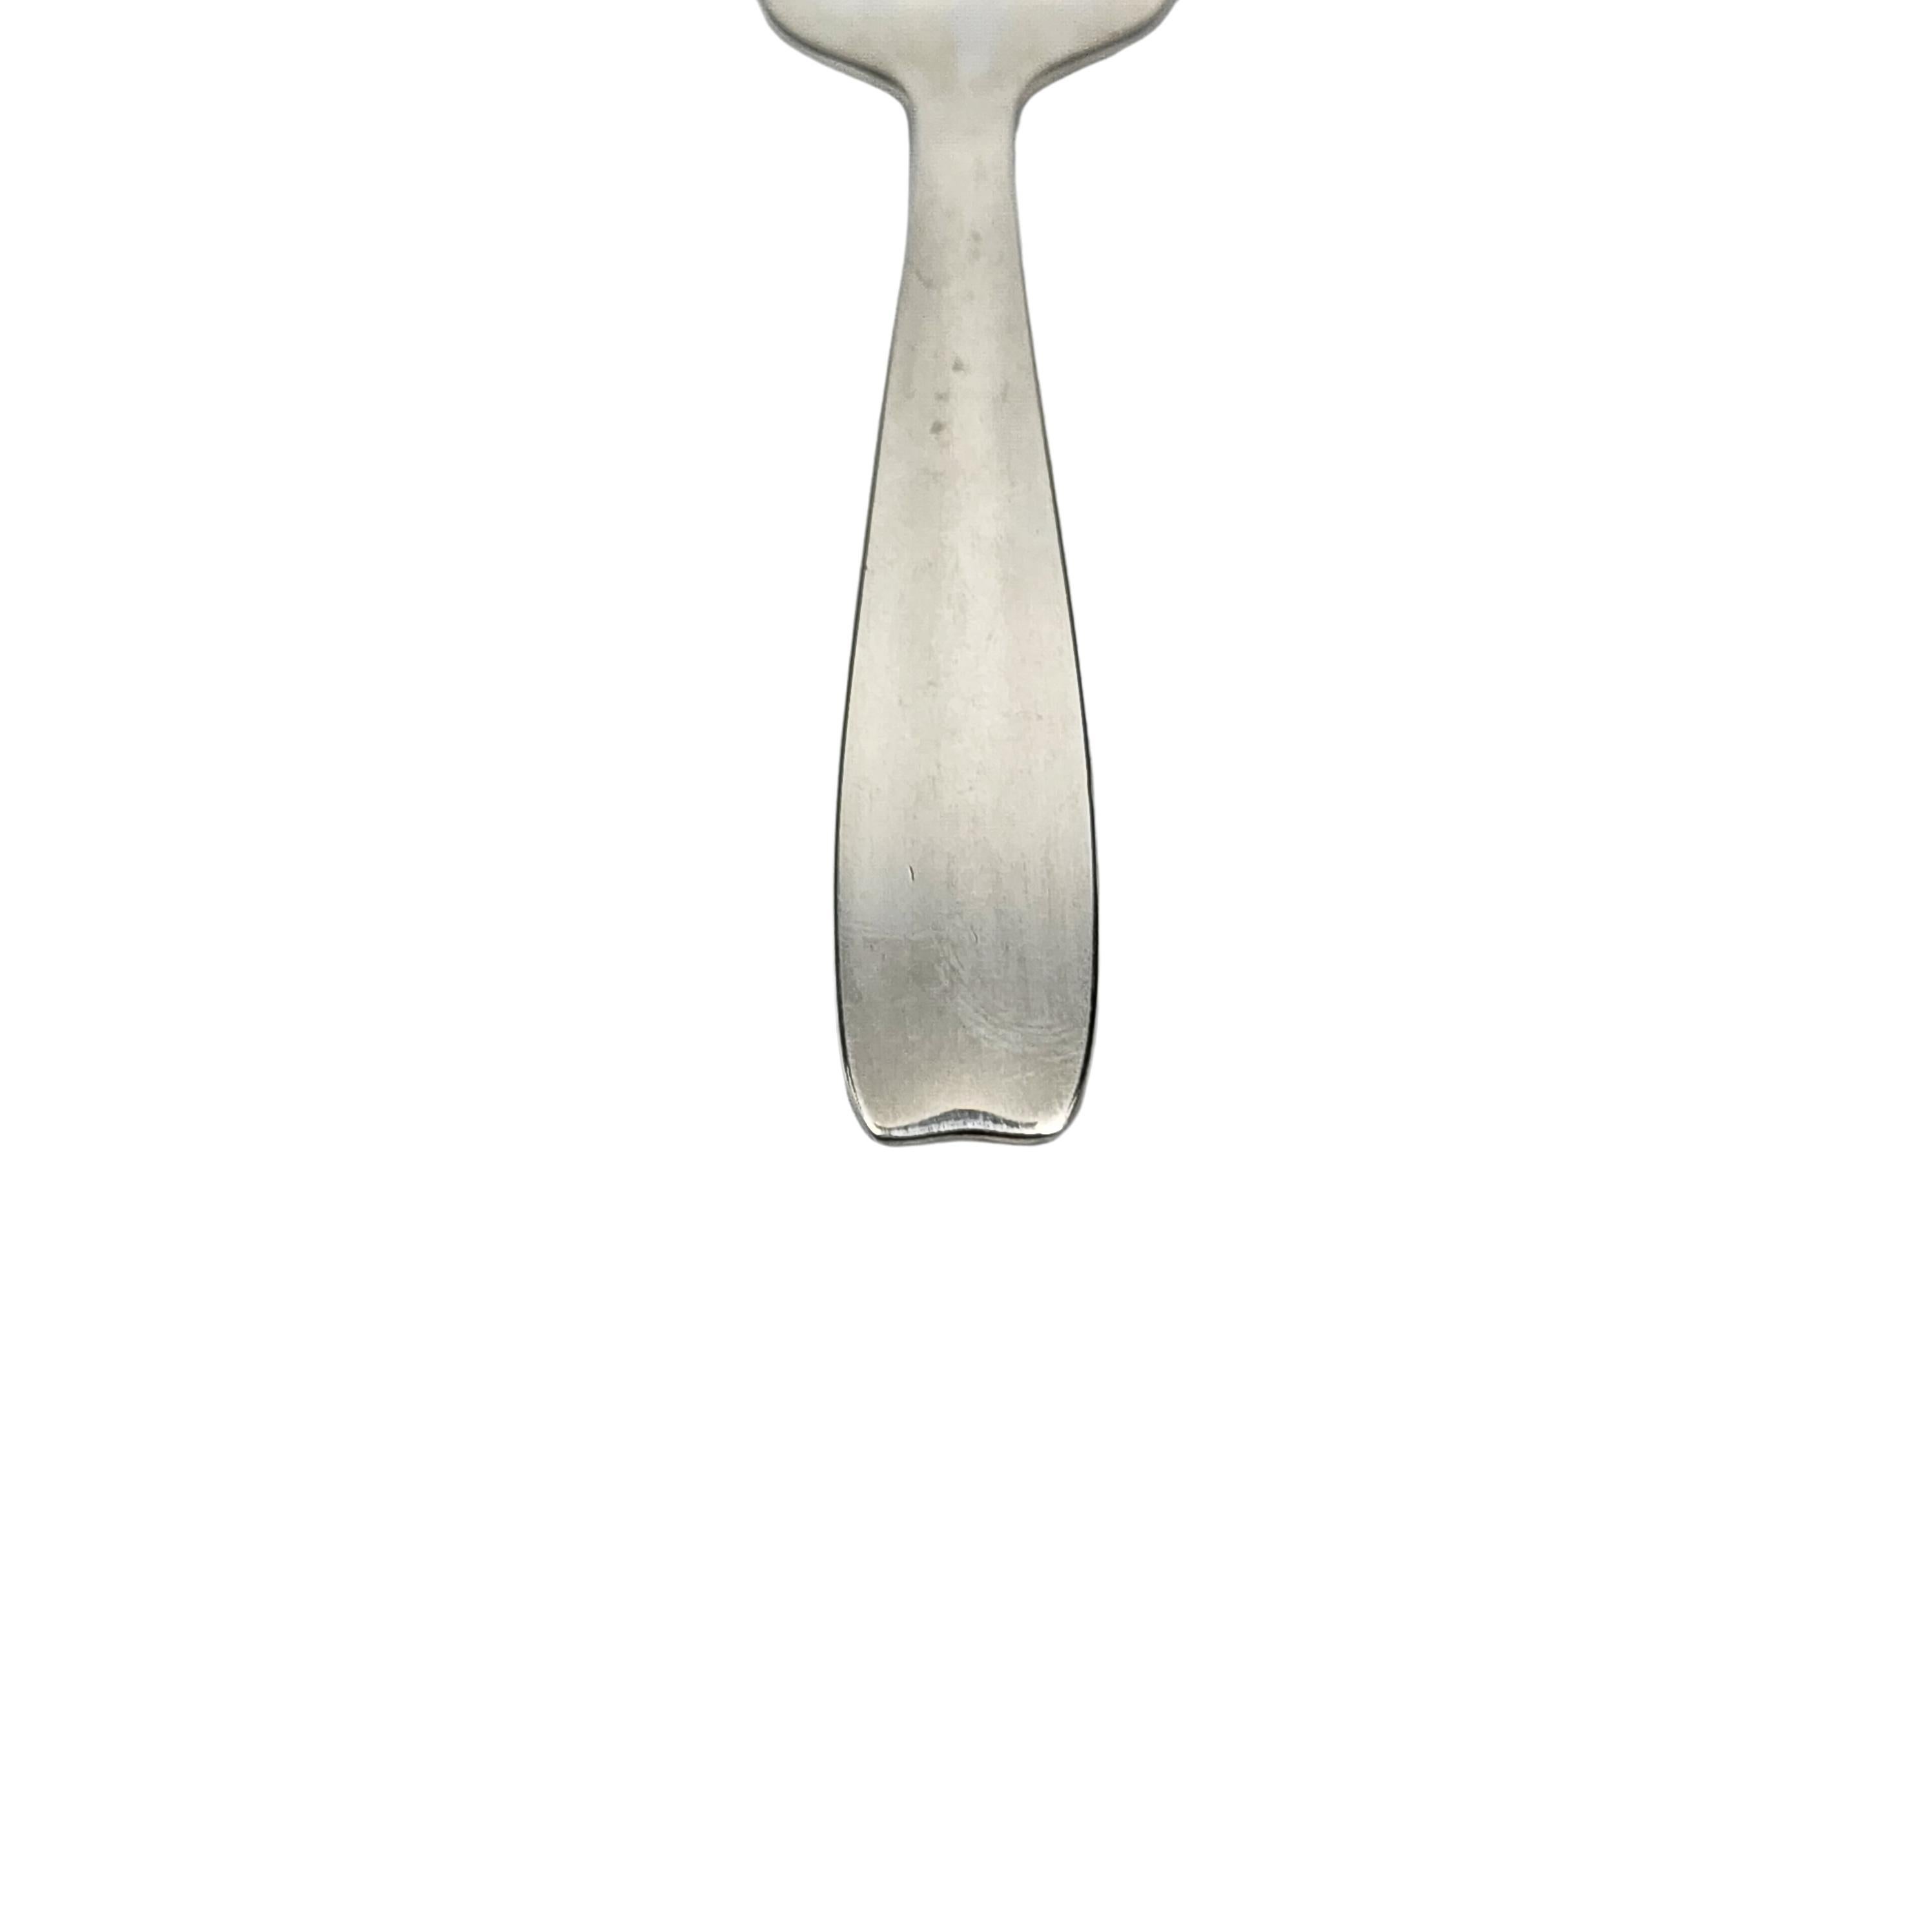 Tiffany & Co Cordis Sterling Silver Baby/Child Feeding Fork #15487 In Good Condition For Sale In Washington Depot, CT